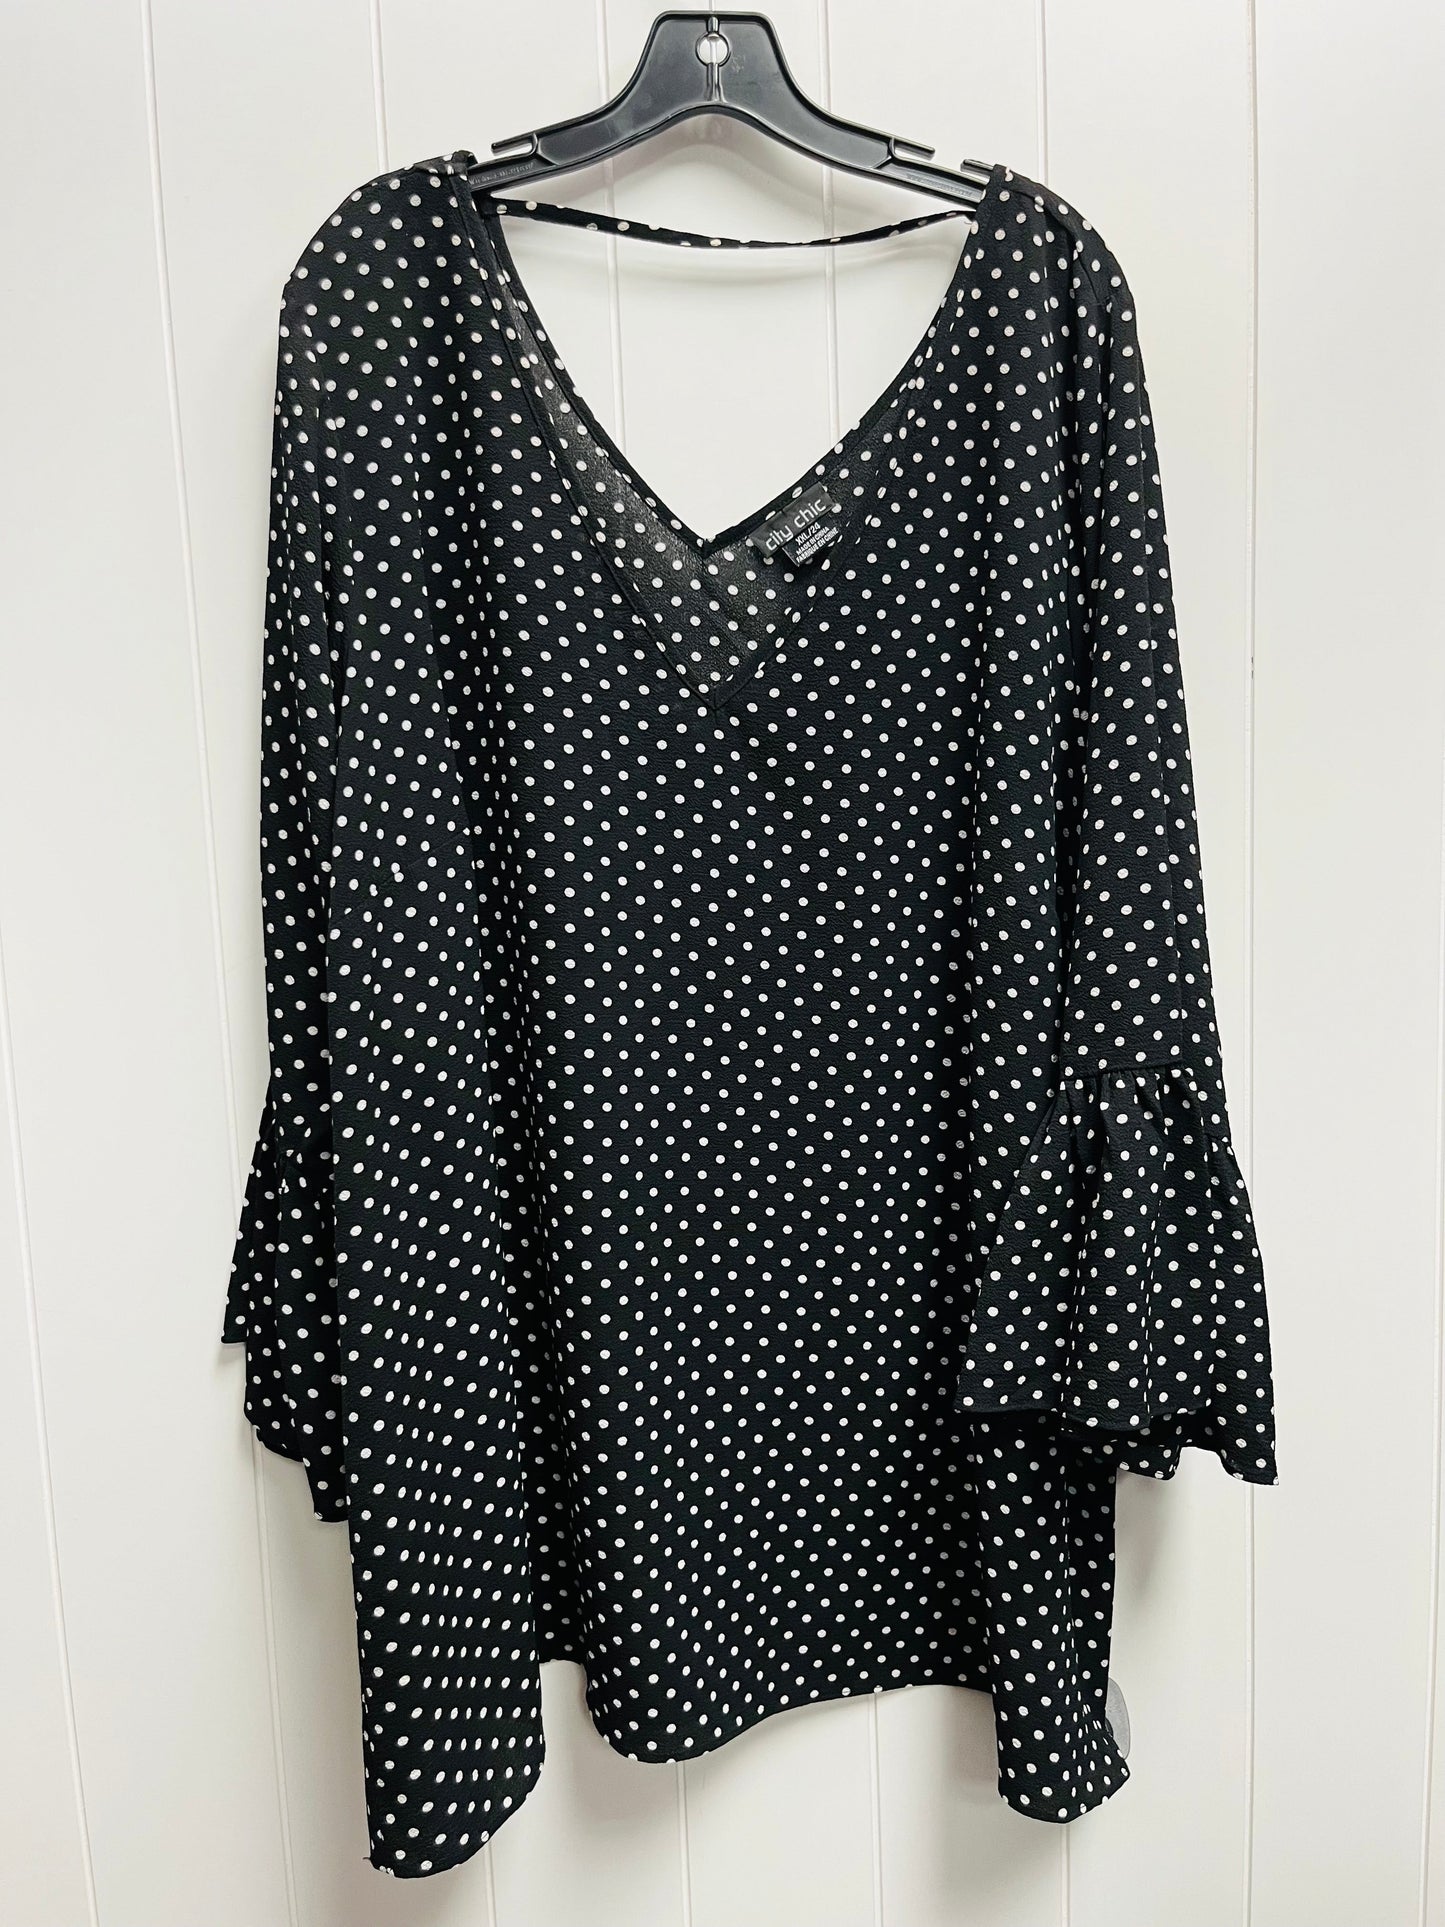 Black & White Top Long Sleeve City Chic, Size 24